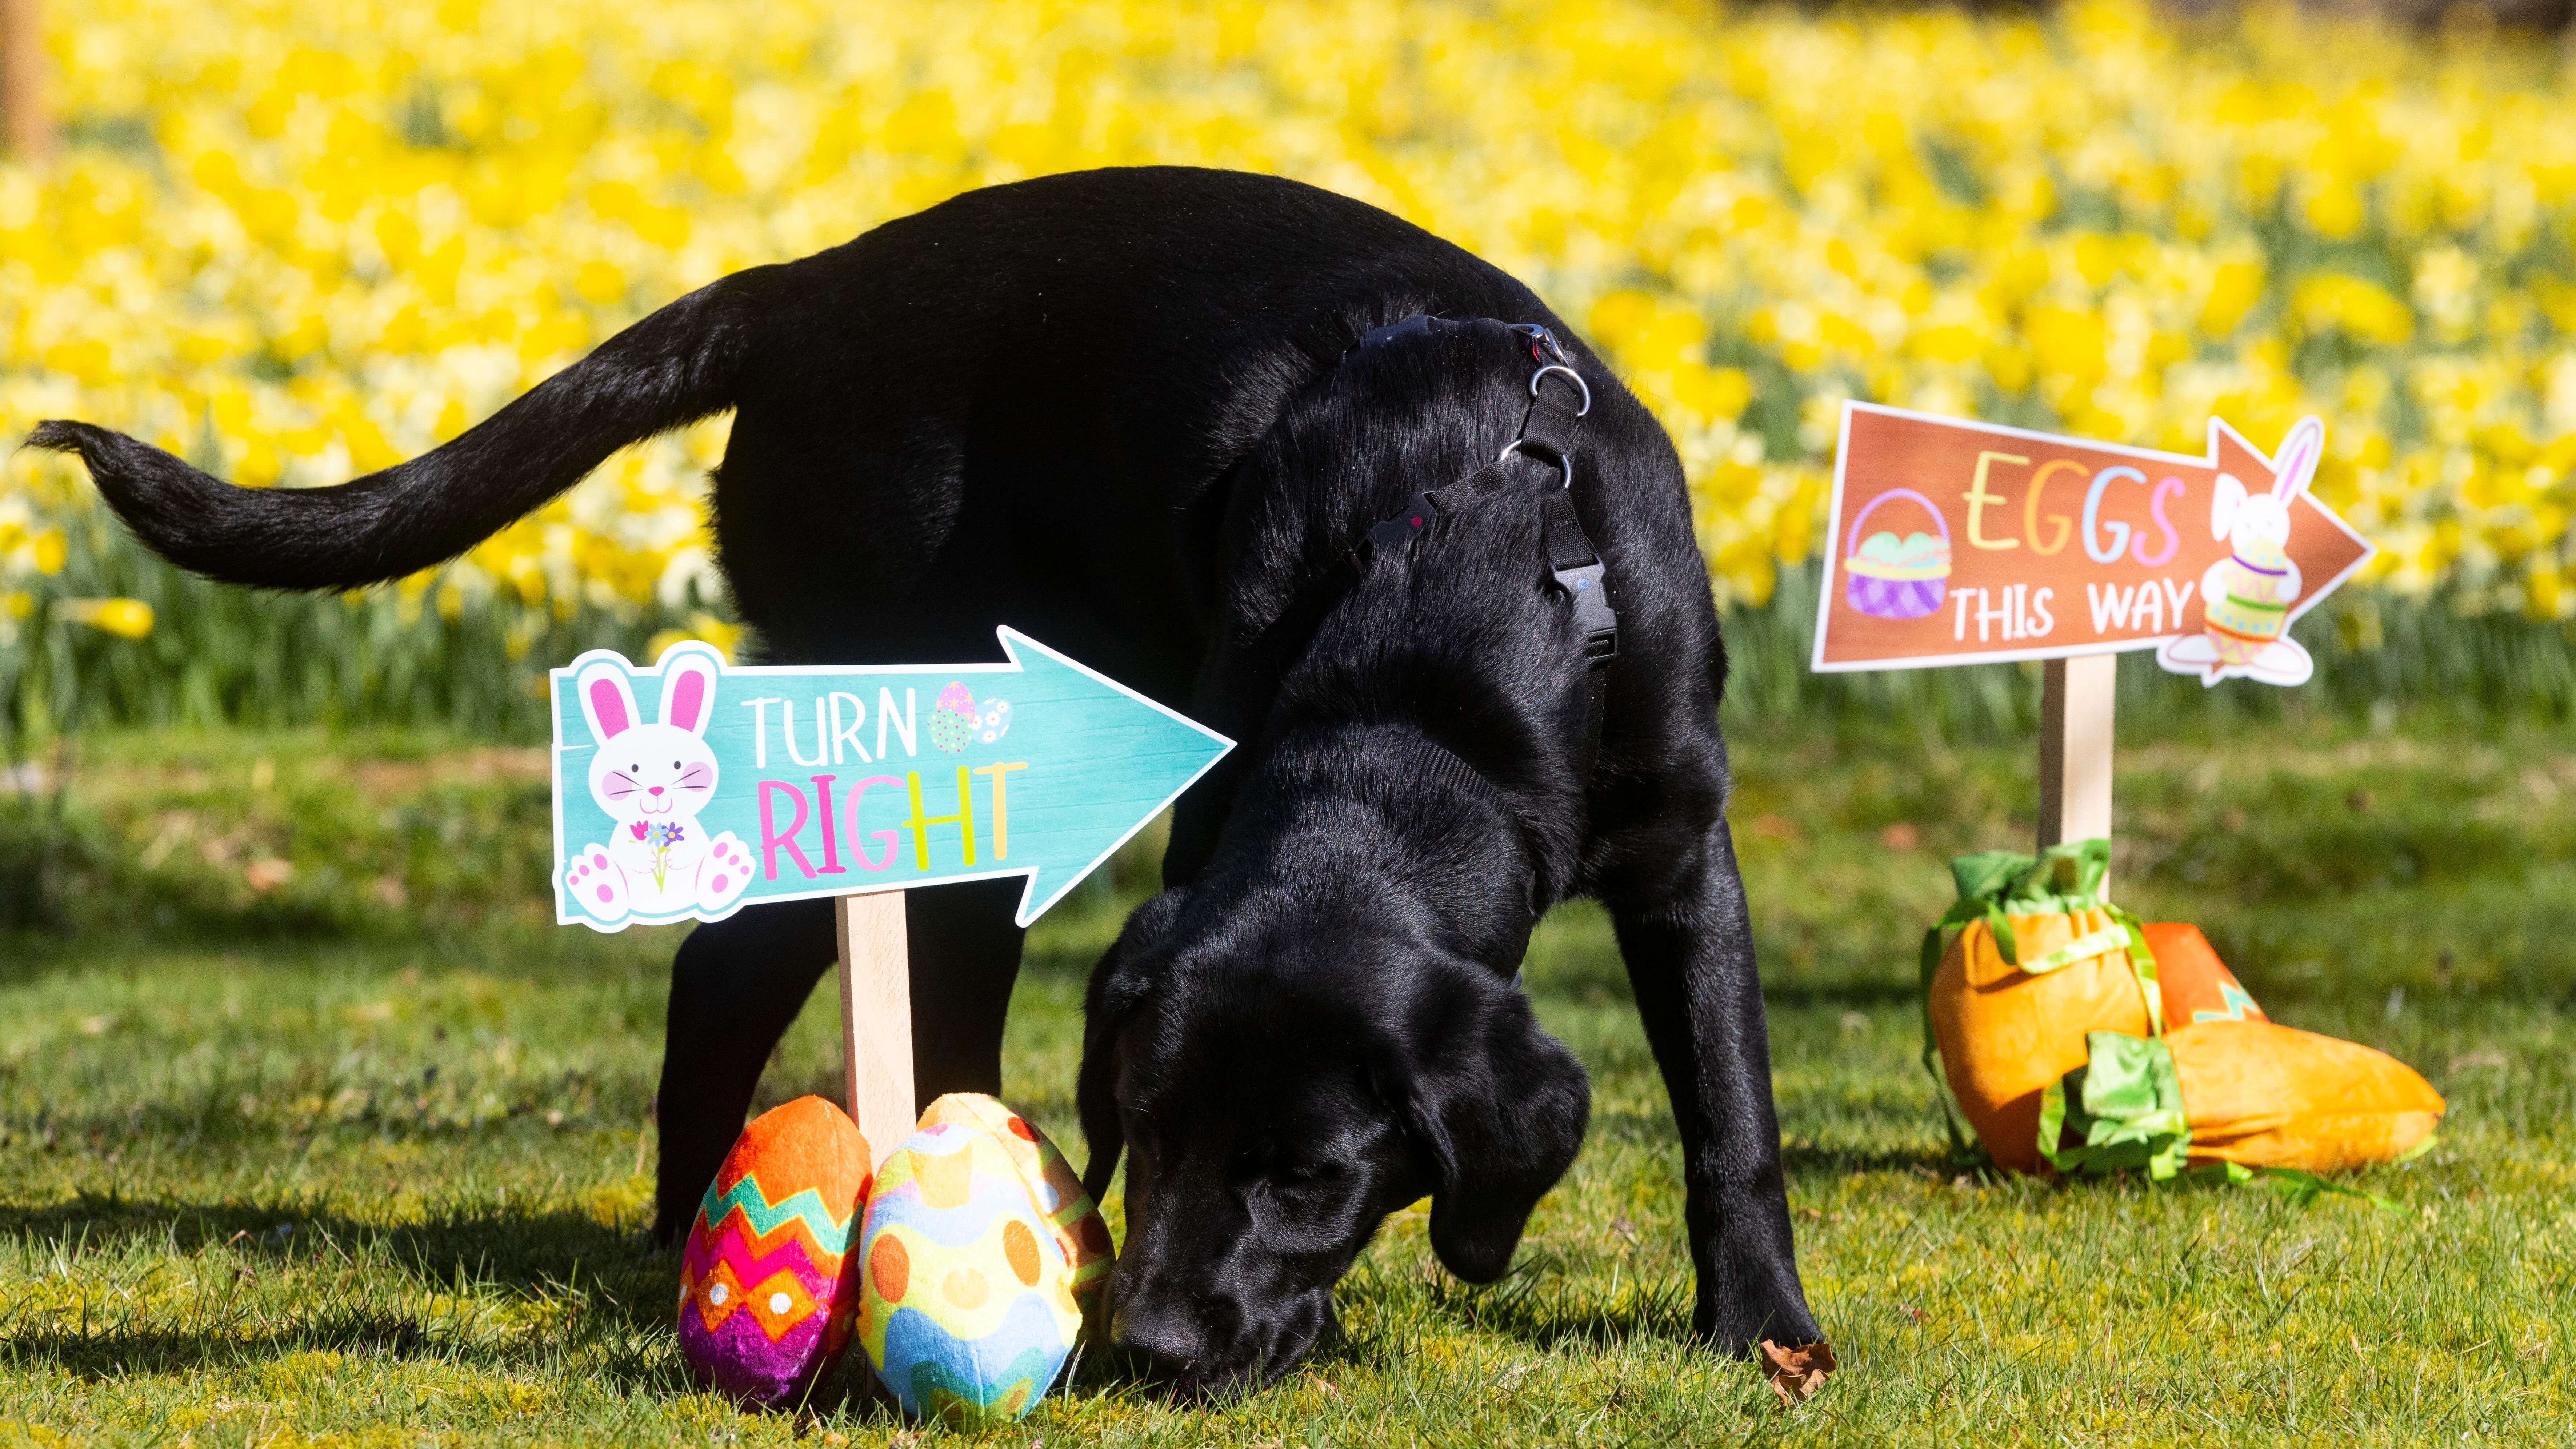 Black Labrador cross guide dog puppy Lukar sniffs around an Easter egg hunt sign which reads 'Turn right' and has a picture of a white bunny. There are cuddly toy eggs at the base. 